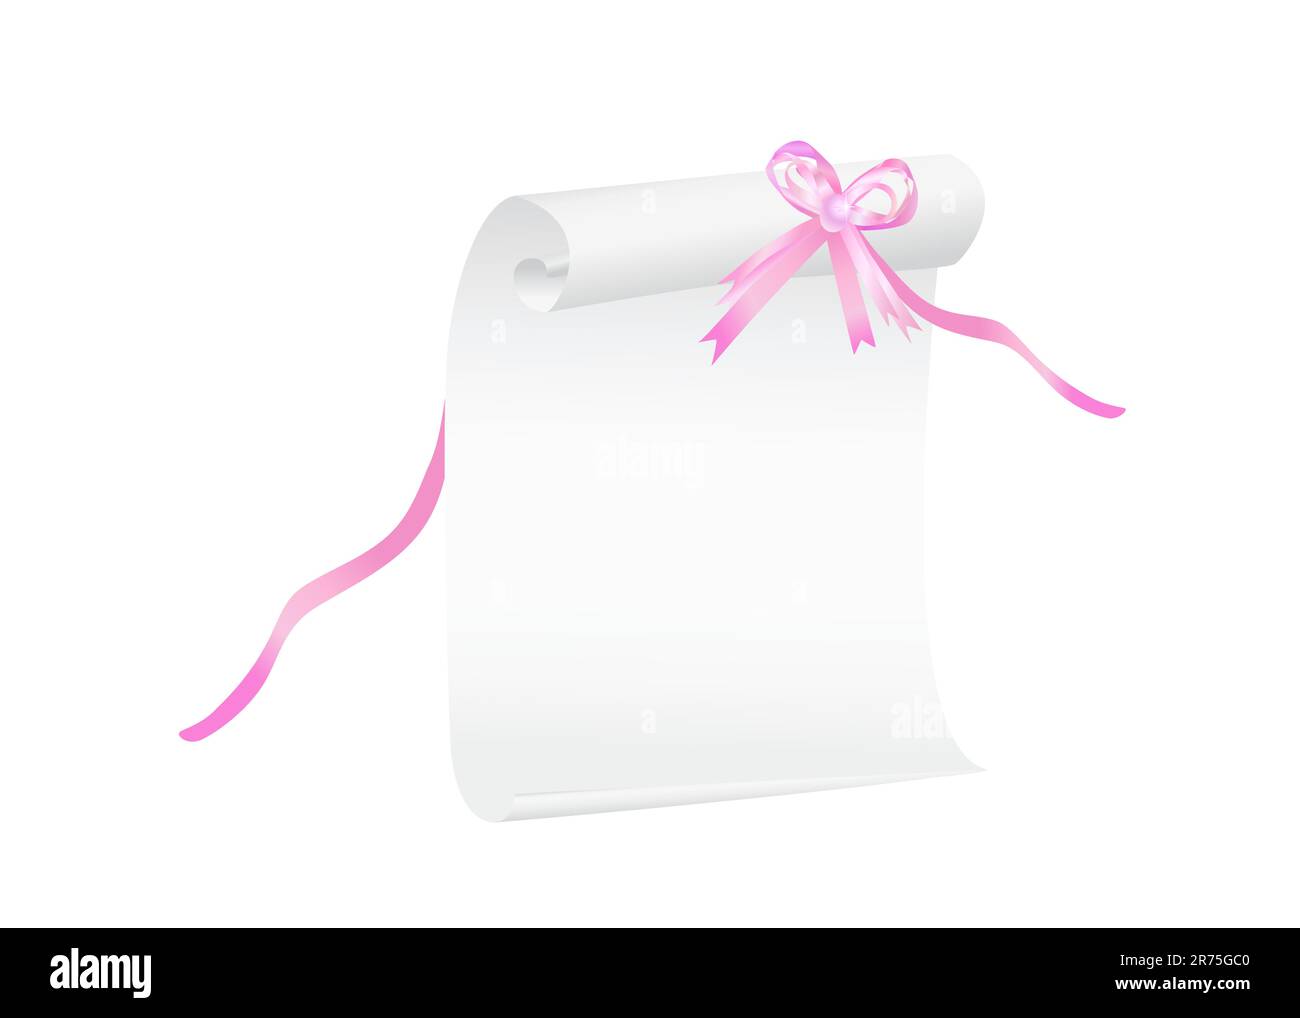 Pink wedding ribbon Cut Out Stock Images & Pictures - Alamy